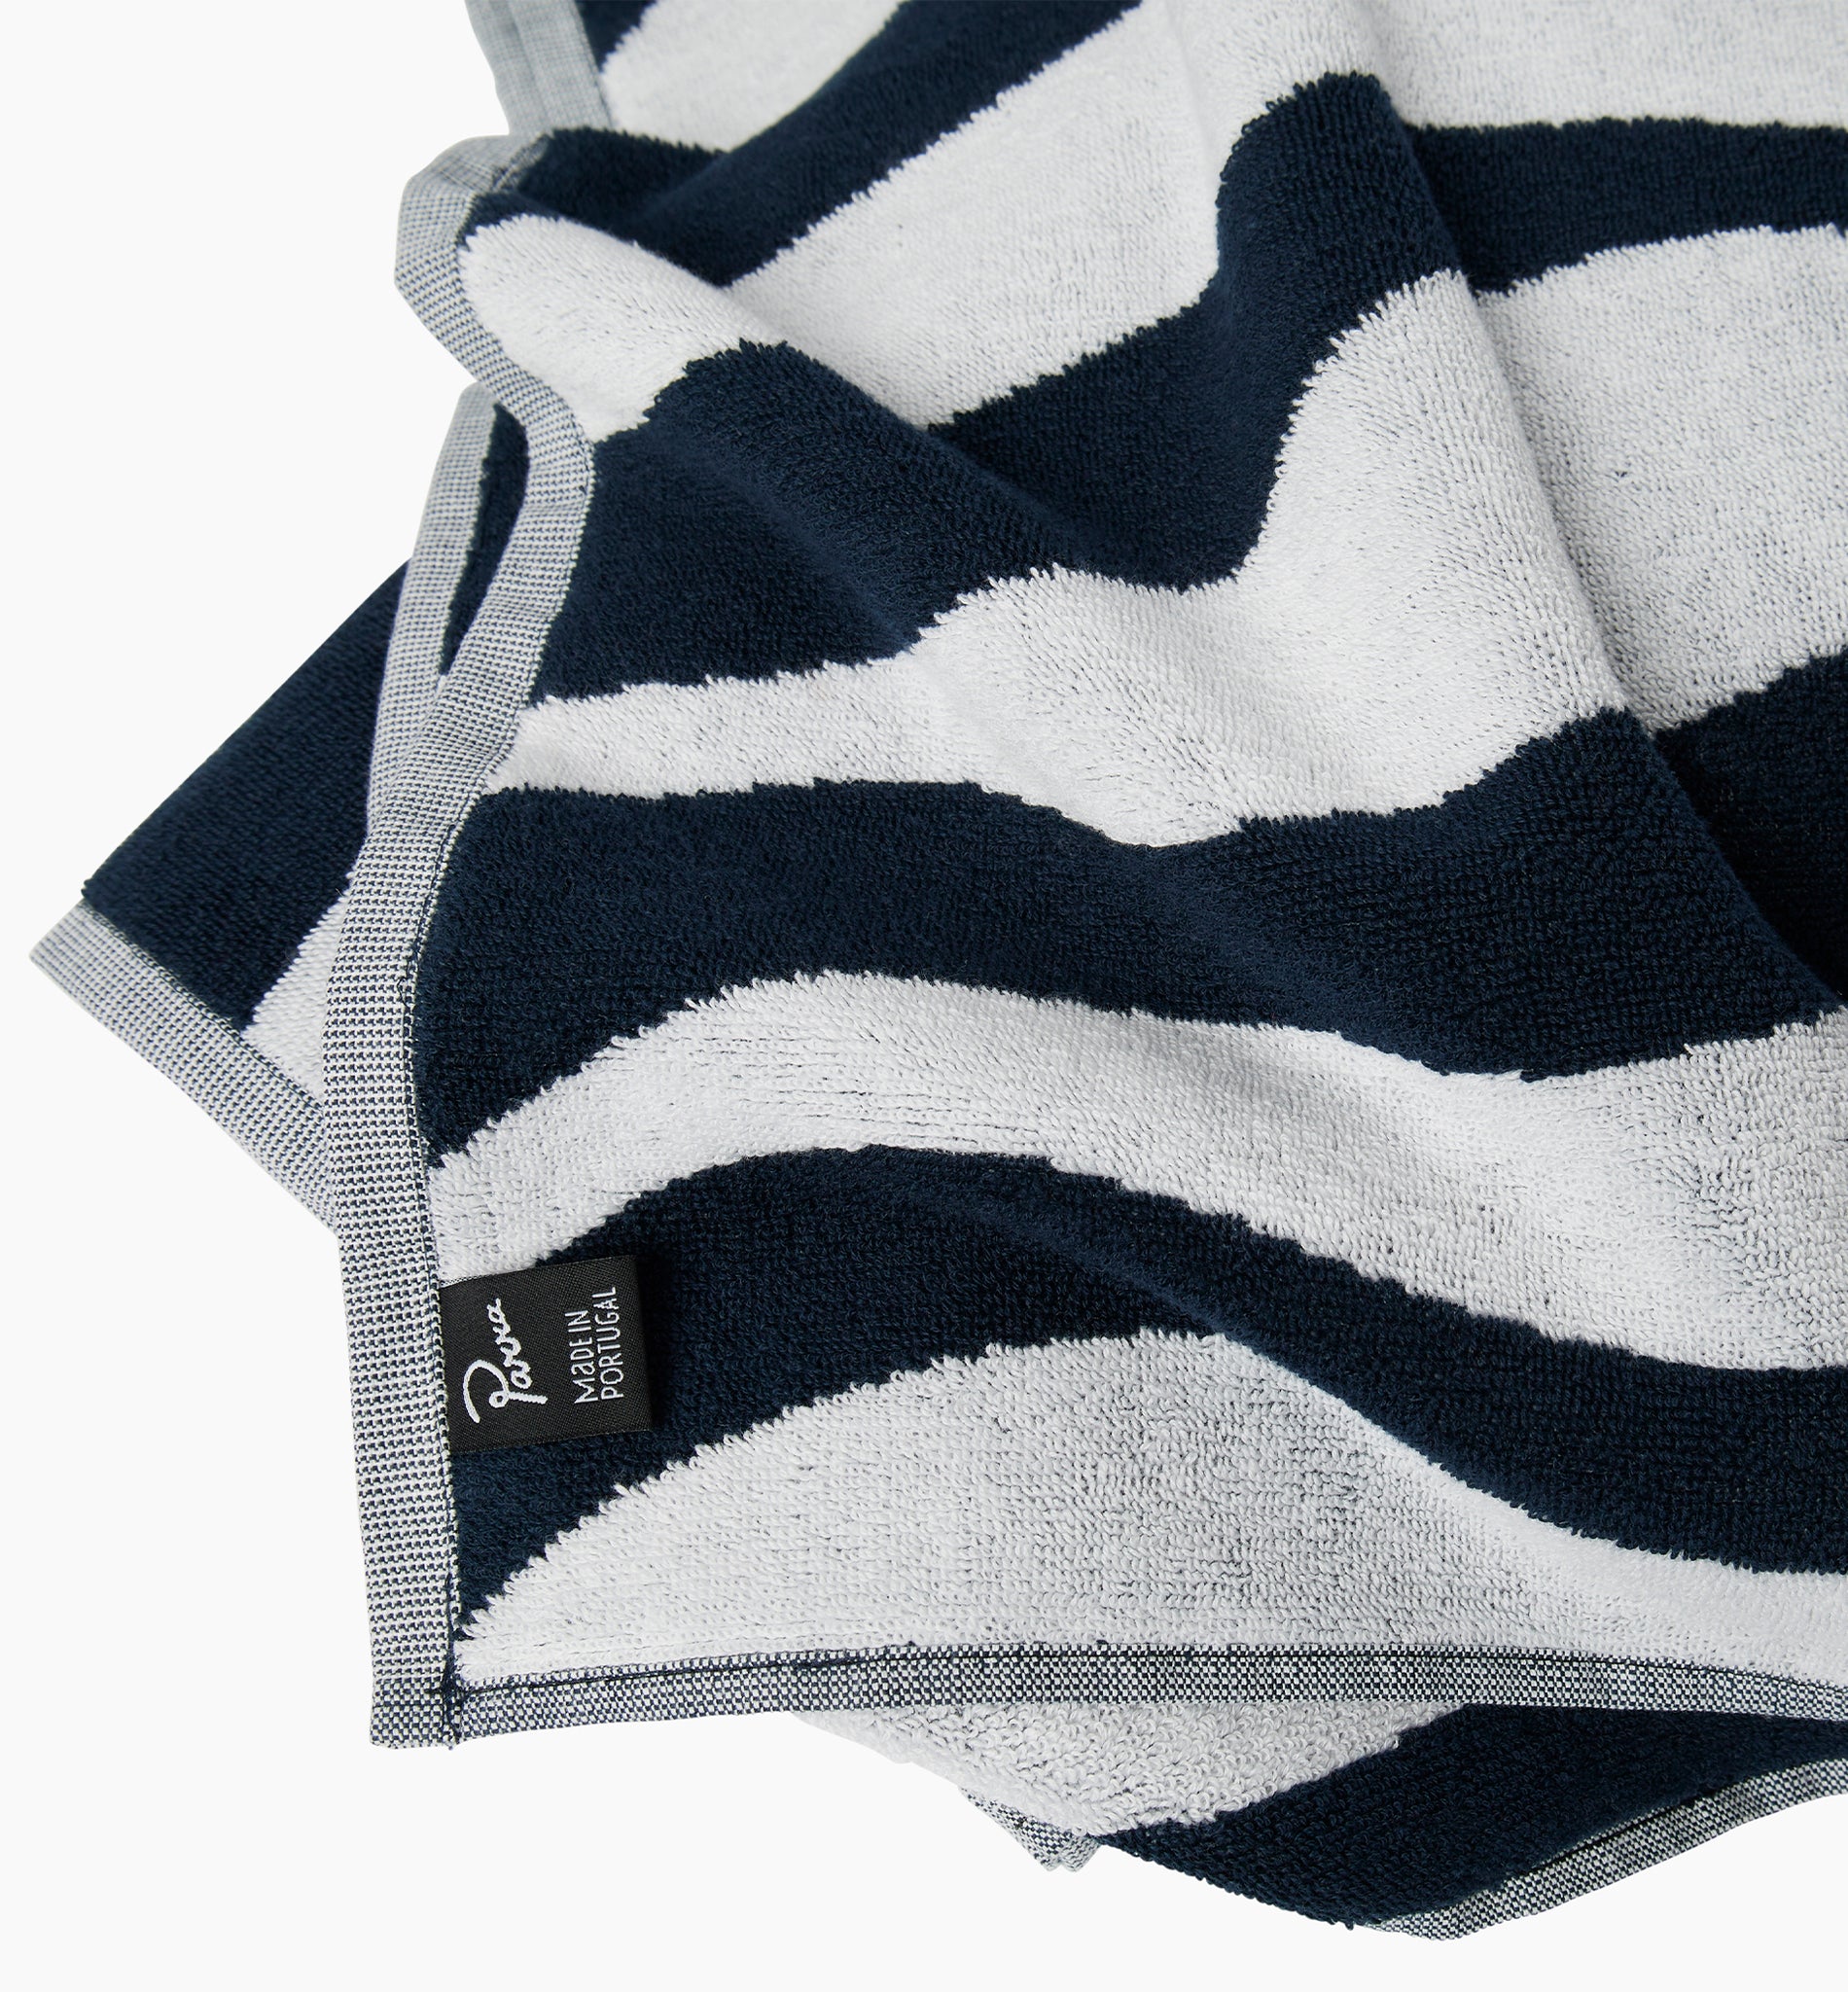 Waves of the Navy Bath Towel set of 2